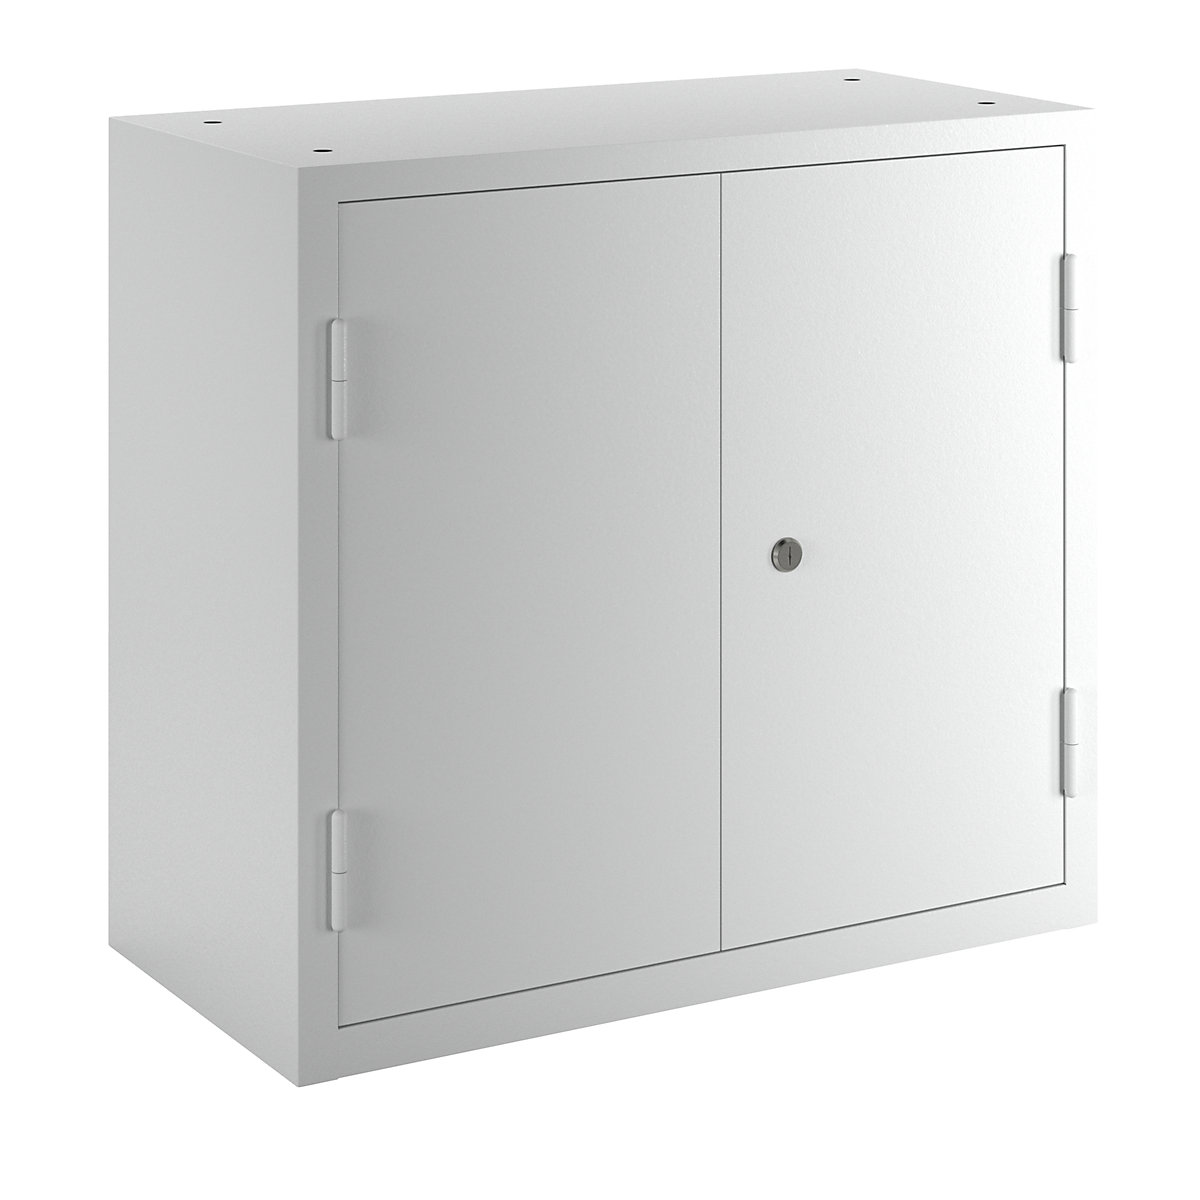 Wall mounted cupboard for the workshop – eurokraft basic, HxWxD 600 x 650 x 320 mm, solid panel doors, light grey RAL 7035-5